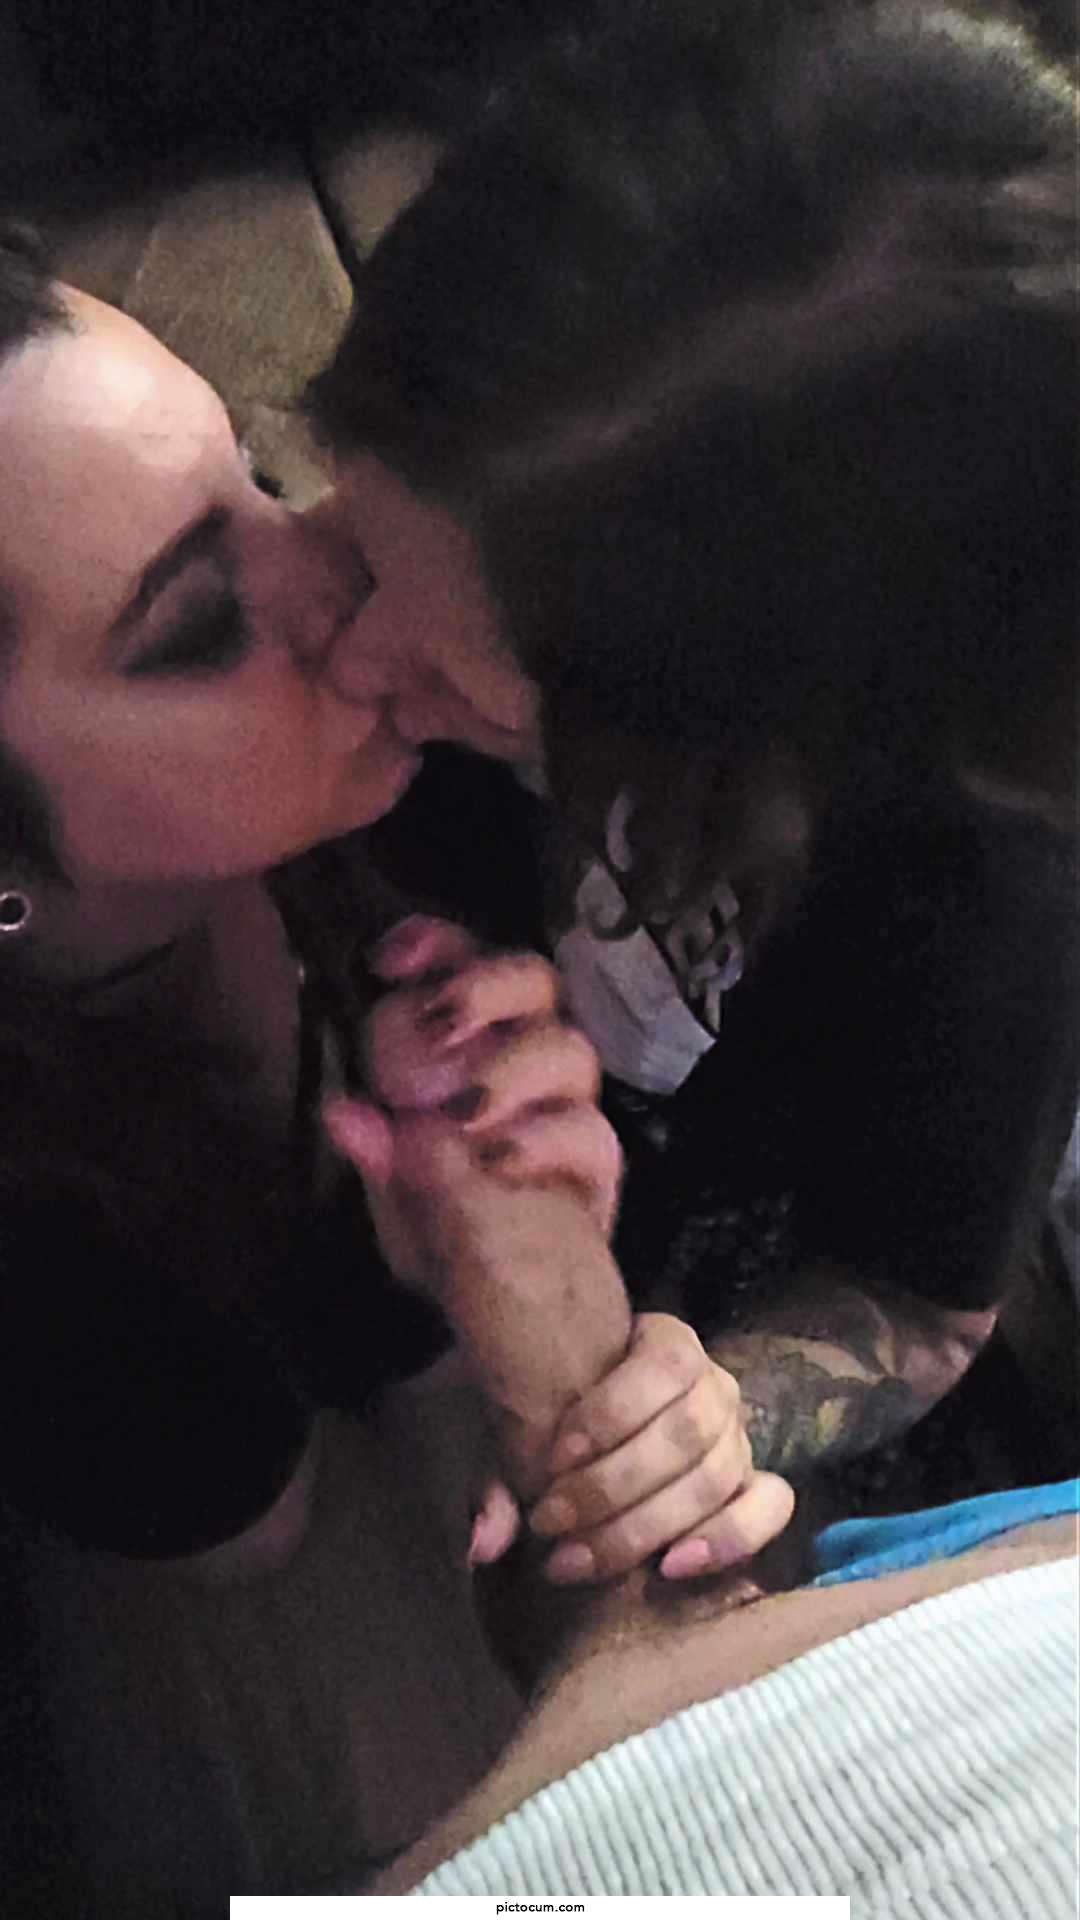 Making out with this Princess while stroking him and sucking him between kisses